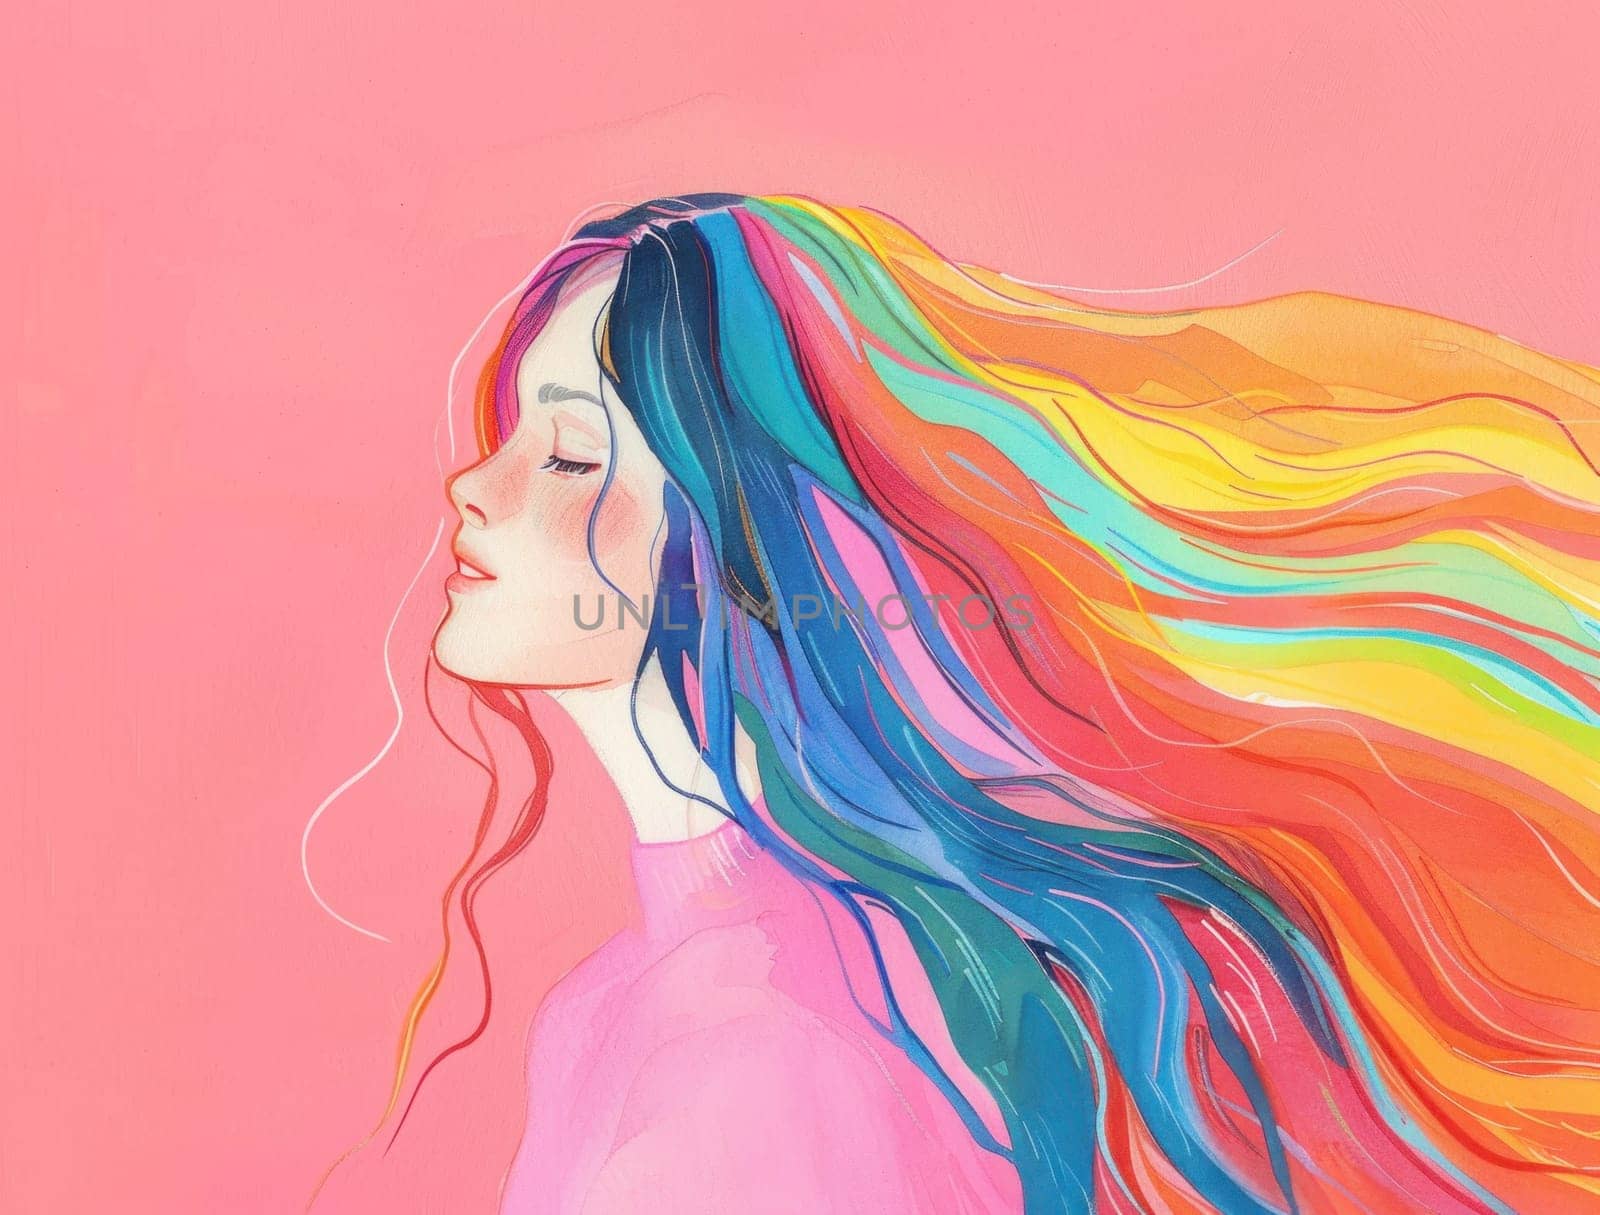 Woman with long hair and rainbow beauty and artistic expression in pink background portrait